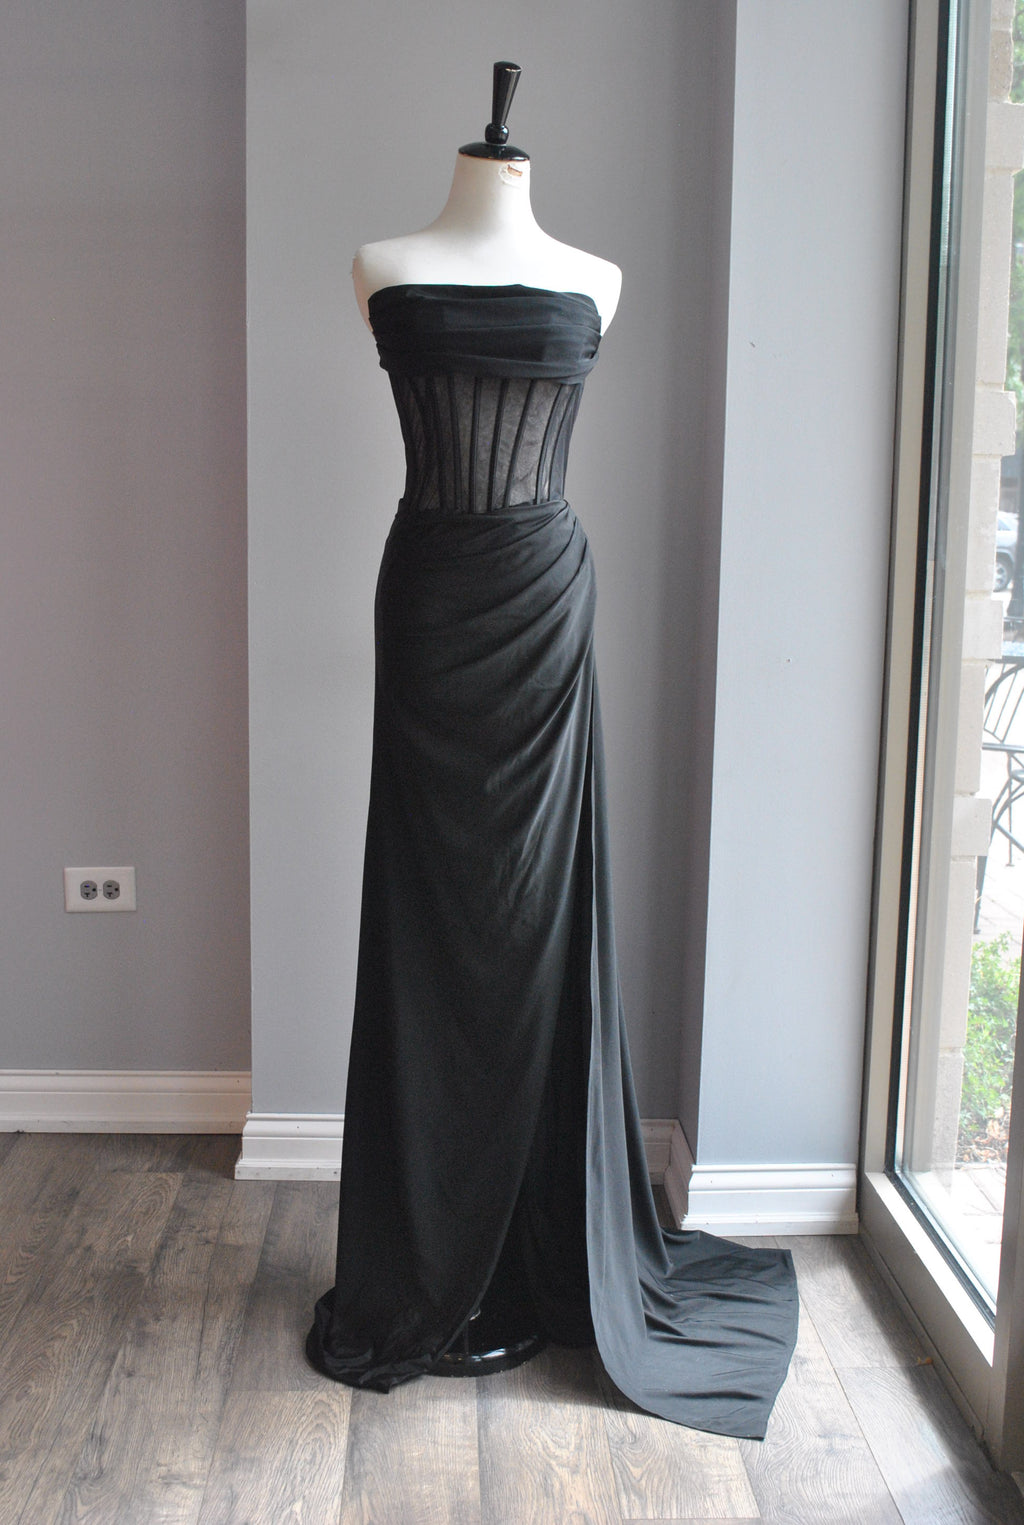 CLEARANCE - BLACK LONG EVENING DRESS WITH SIDE SLIP